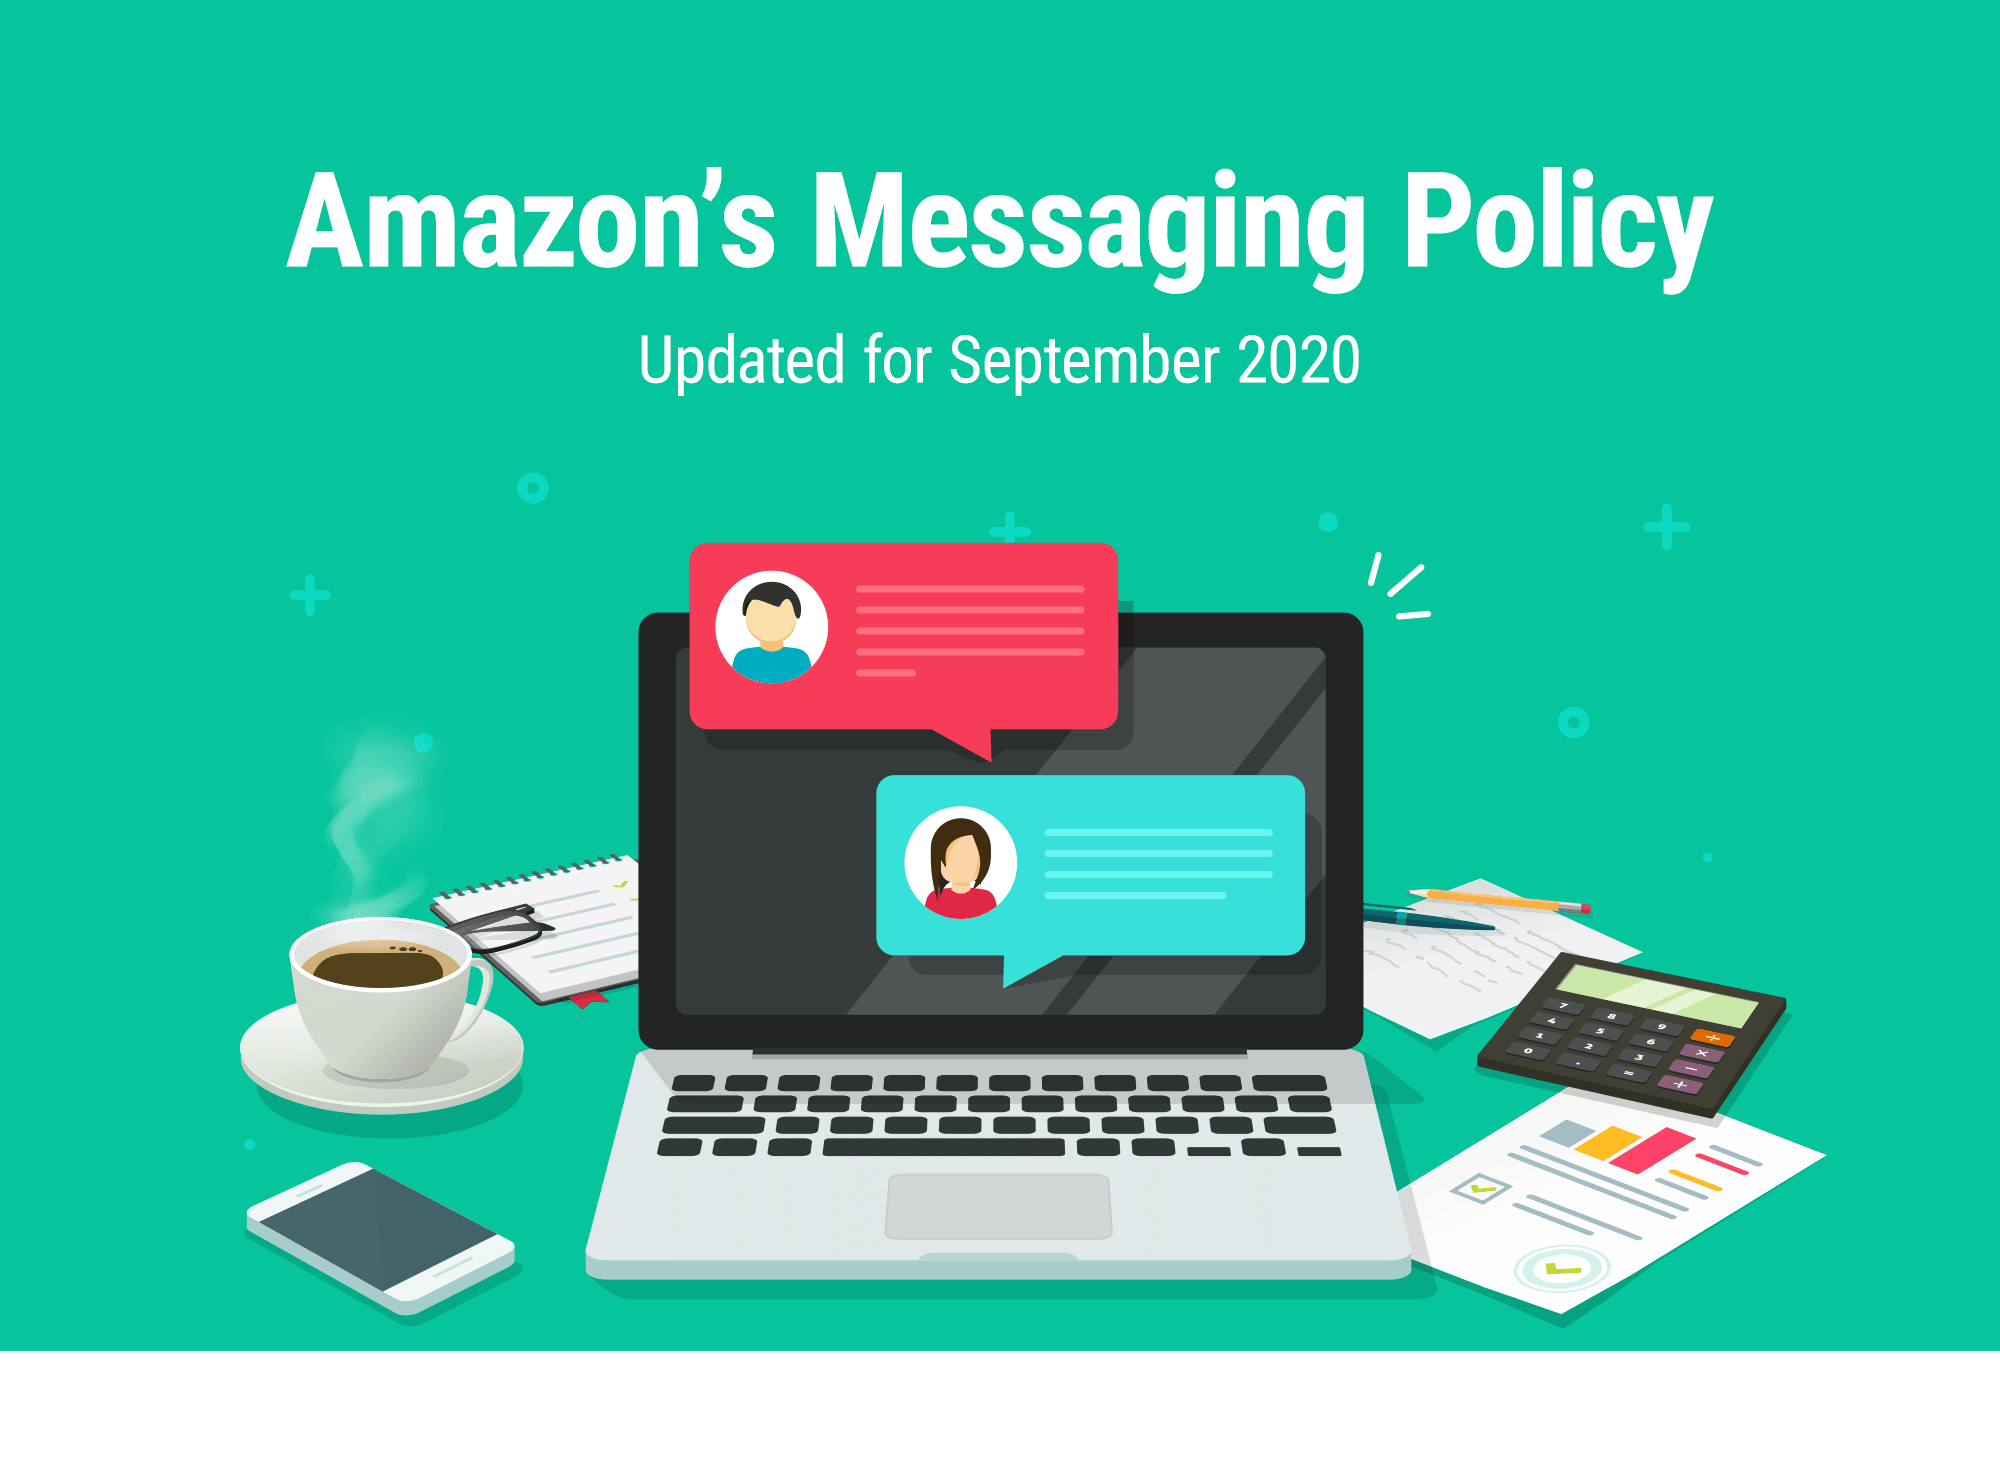 Amazon's New Messaging Policy